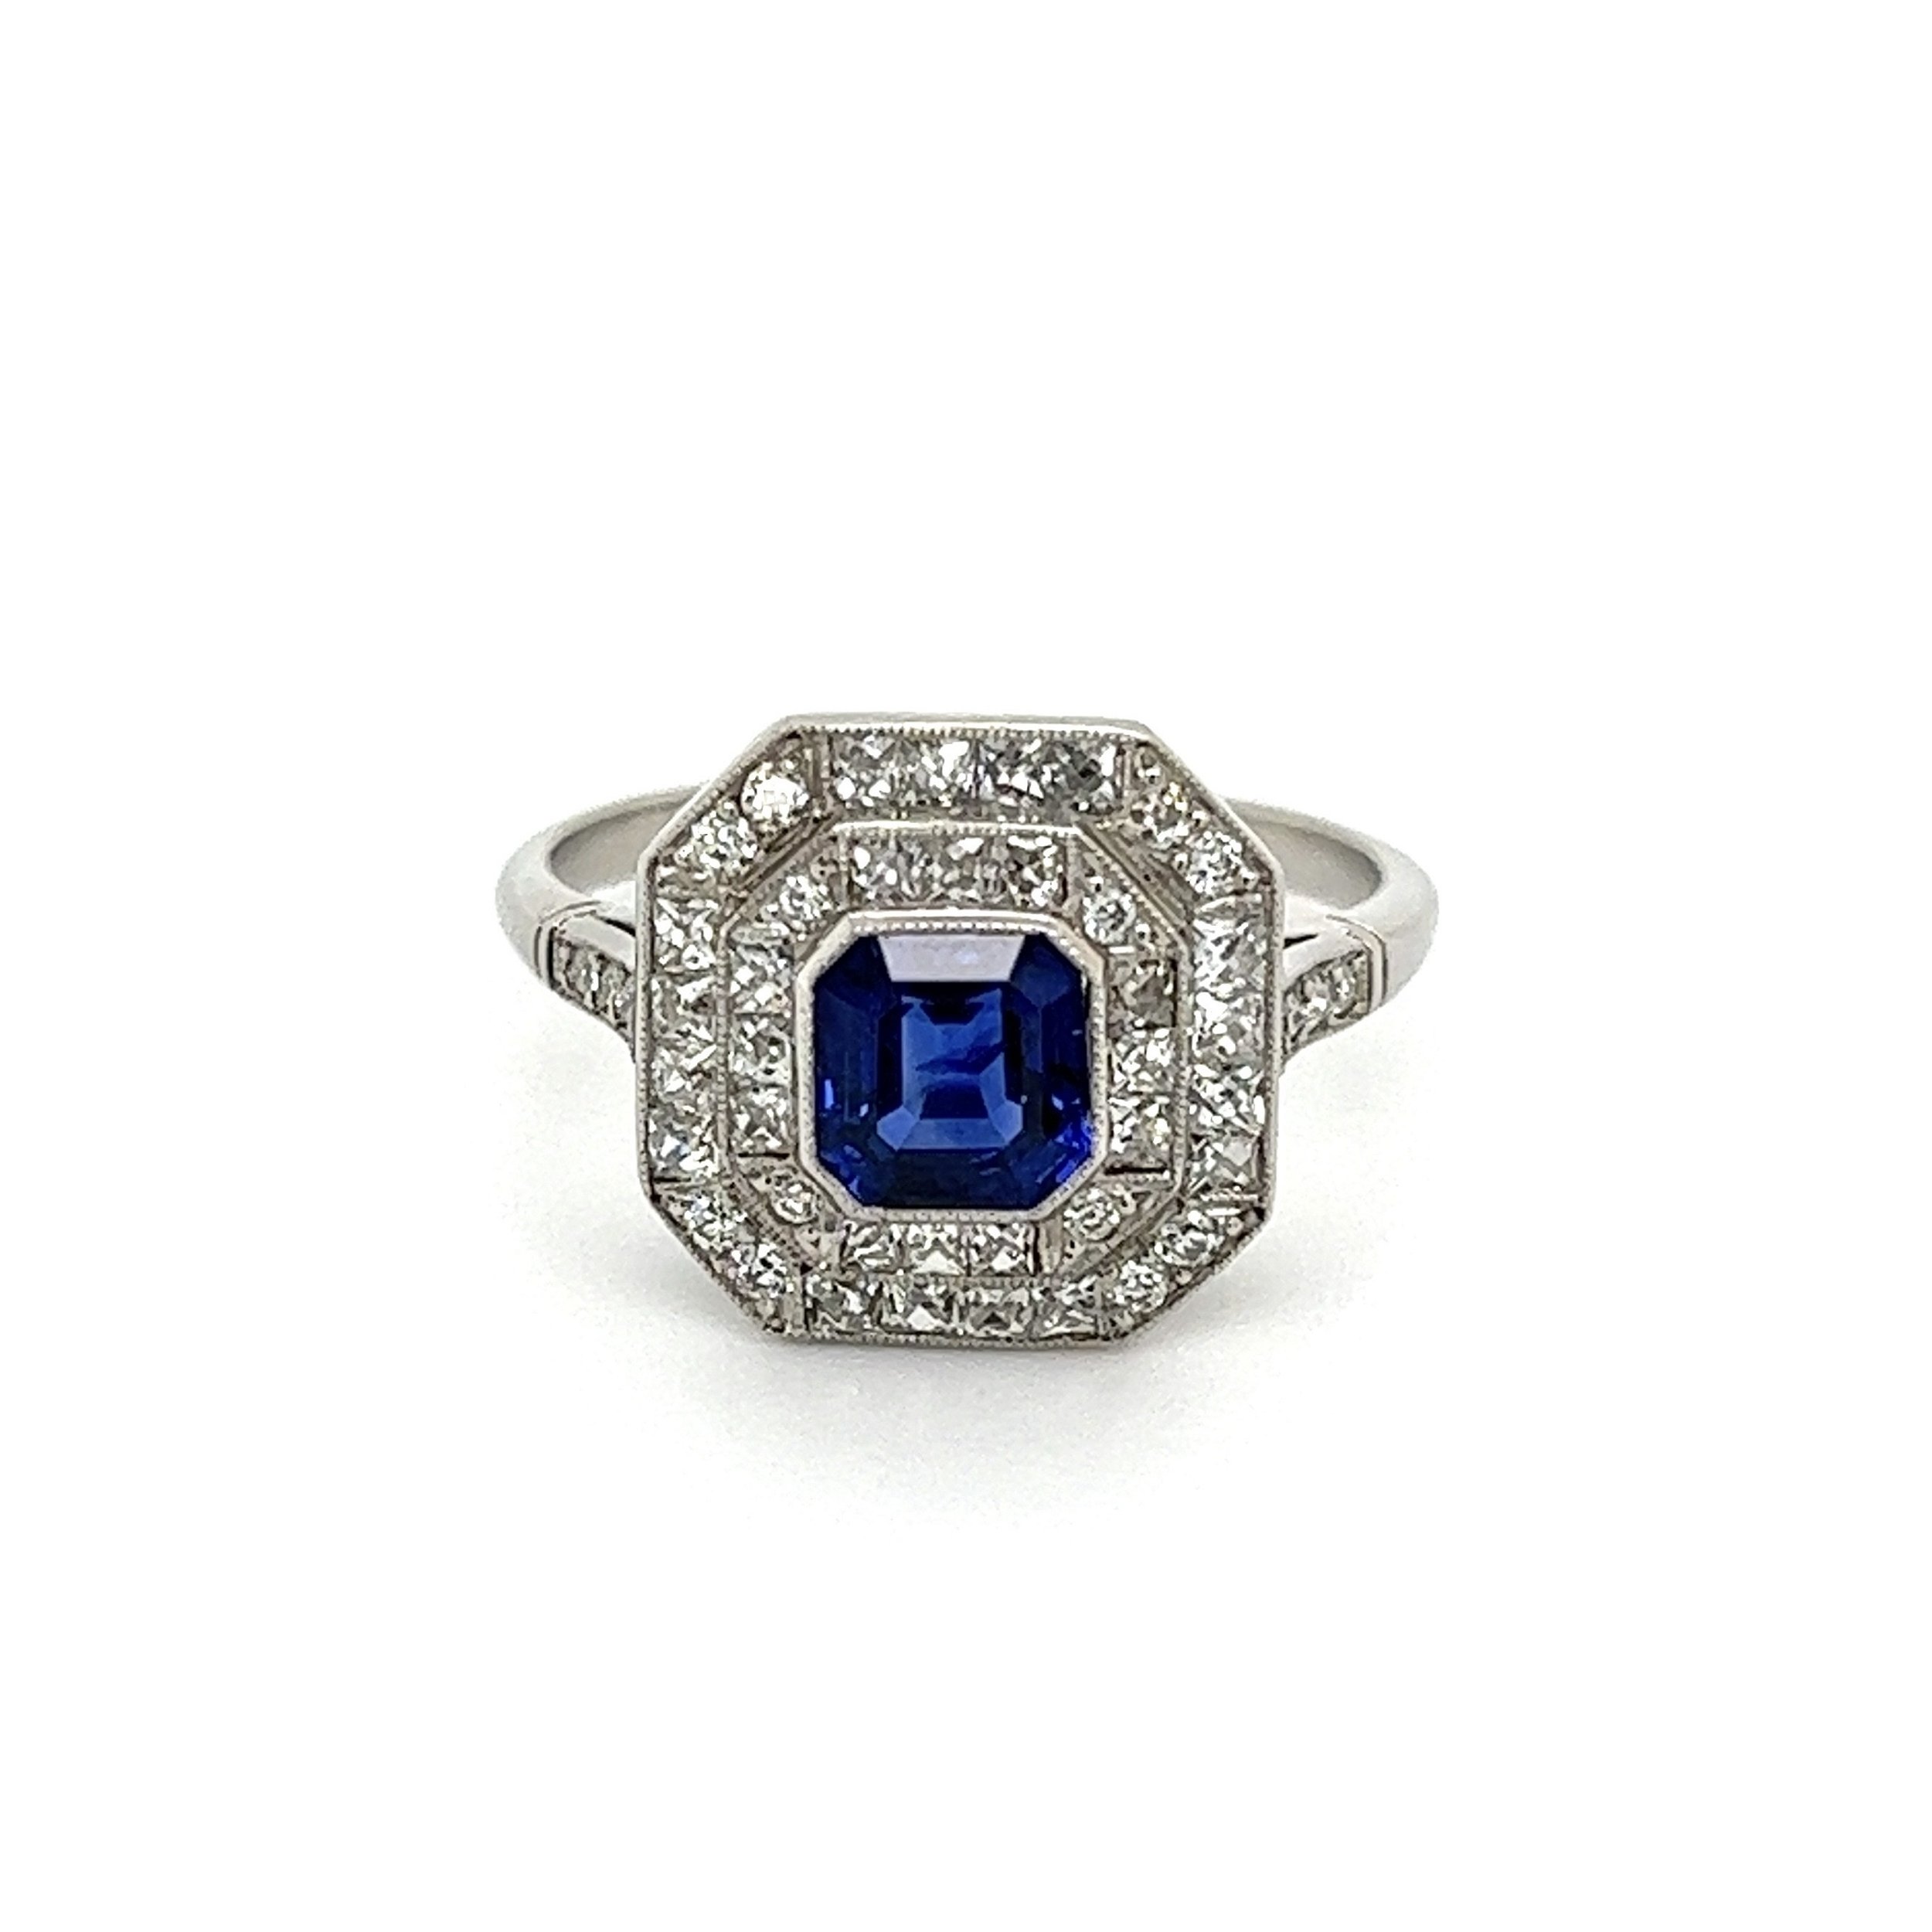 Platinum 1.10ct Asscher Sapphire Surrounded by 1.30tcw French & OEC Diamonds 5.3g, s7.25